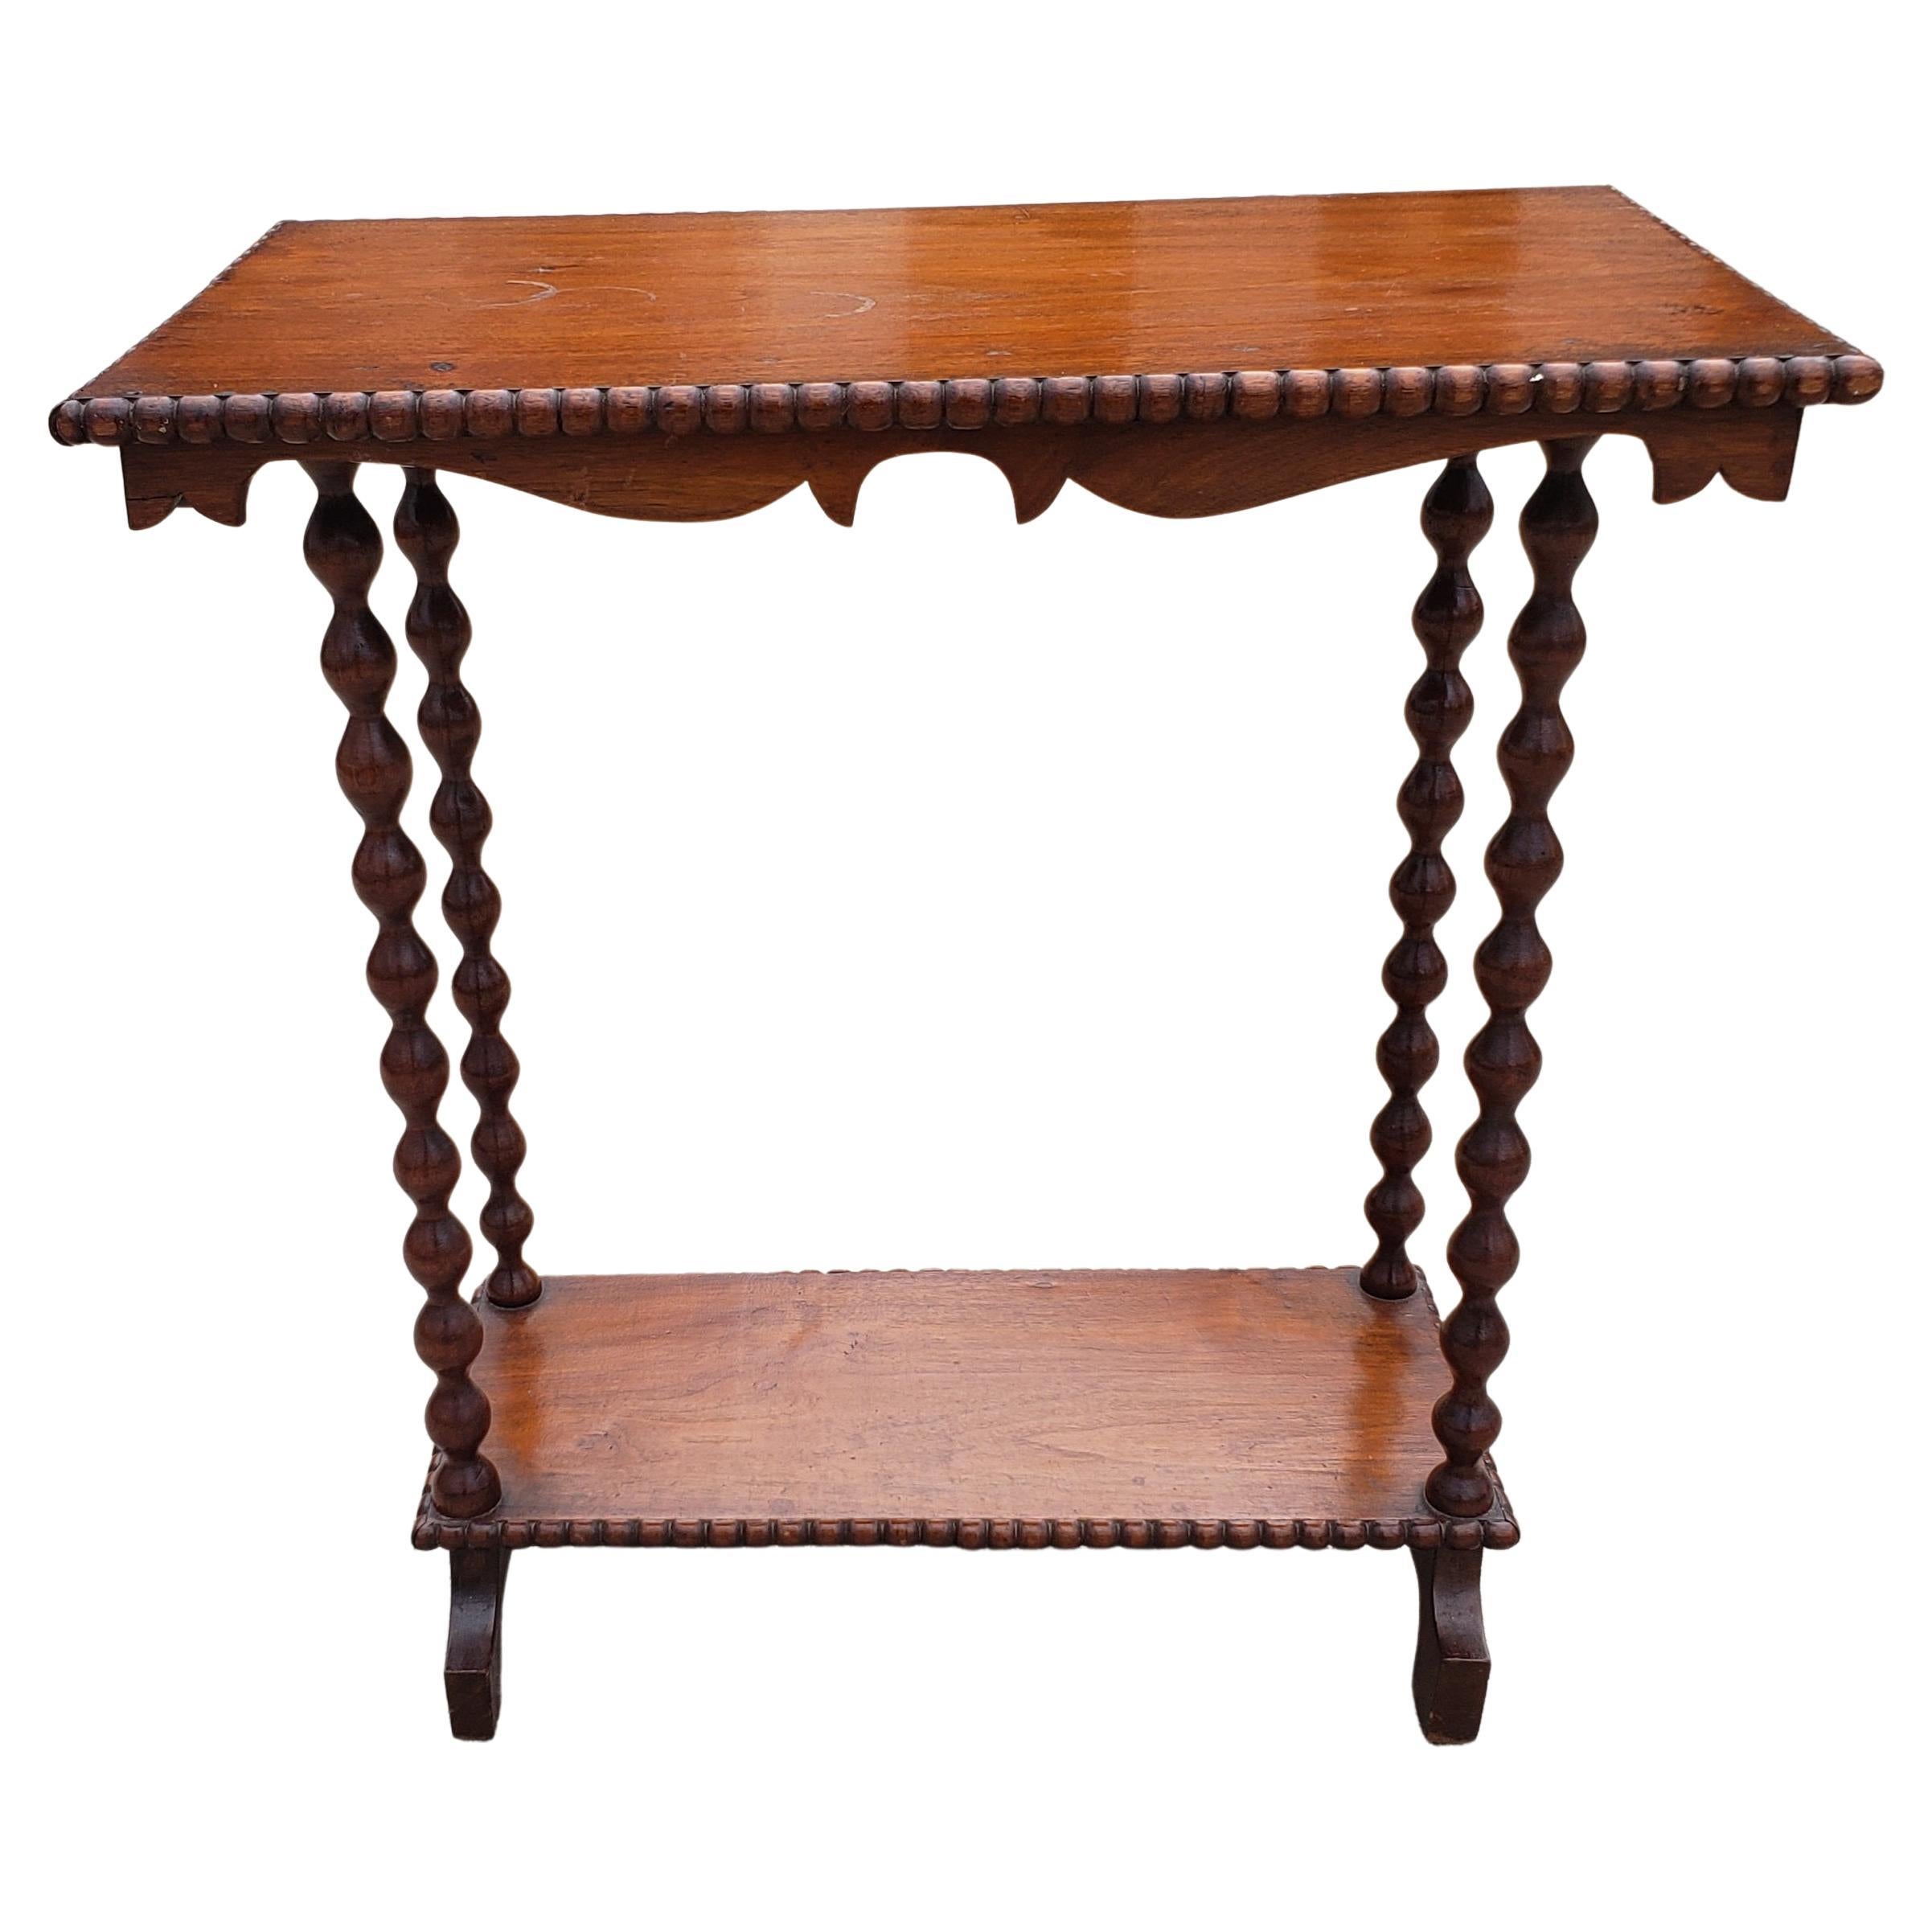 American Bobbing Legs and Rope Edge Occasional Accent Tier Table, circa 1940s